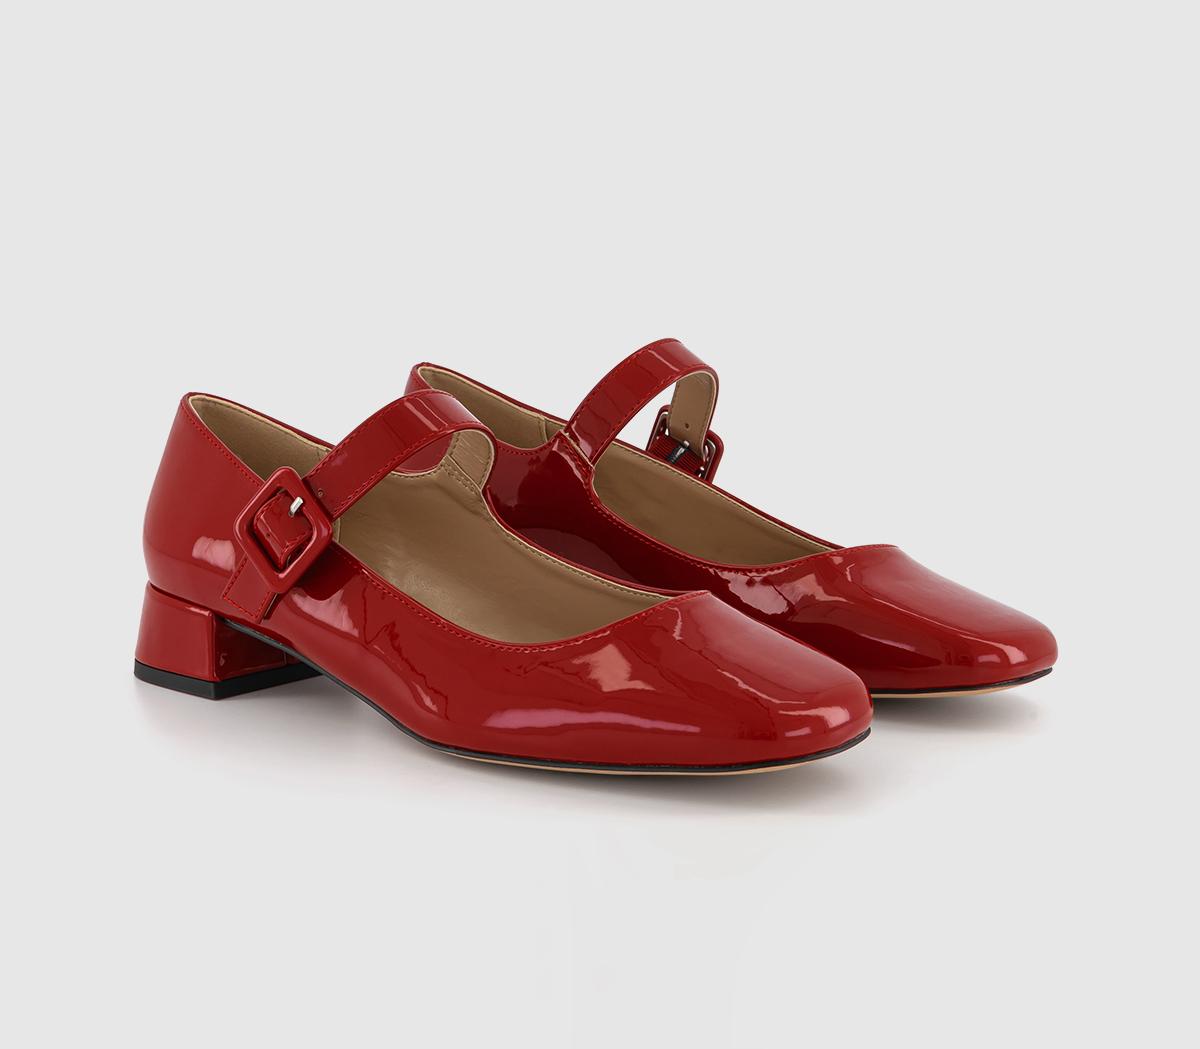 OFFICE Womens Fujio Patent Mary Janes Red, 7